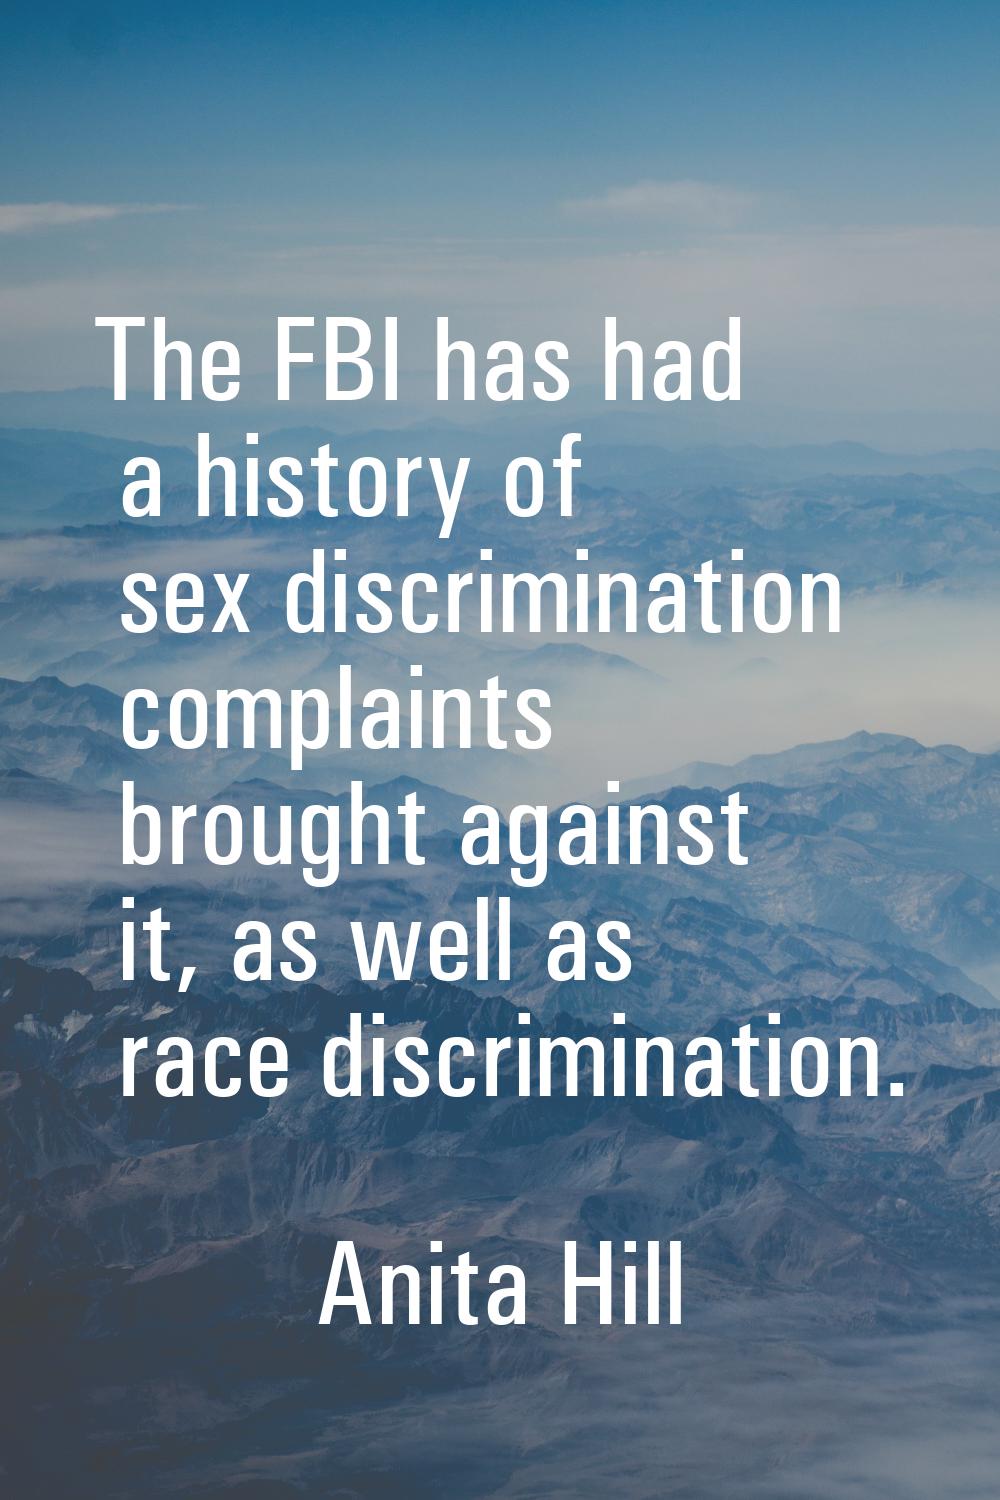 The FBI has had a history of sex discrimination complaints brought against it, as well as race disc